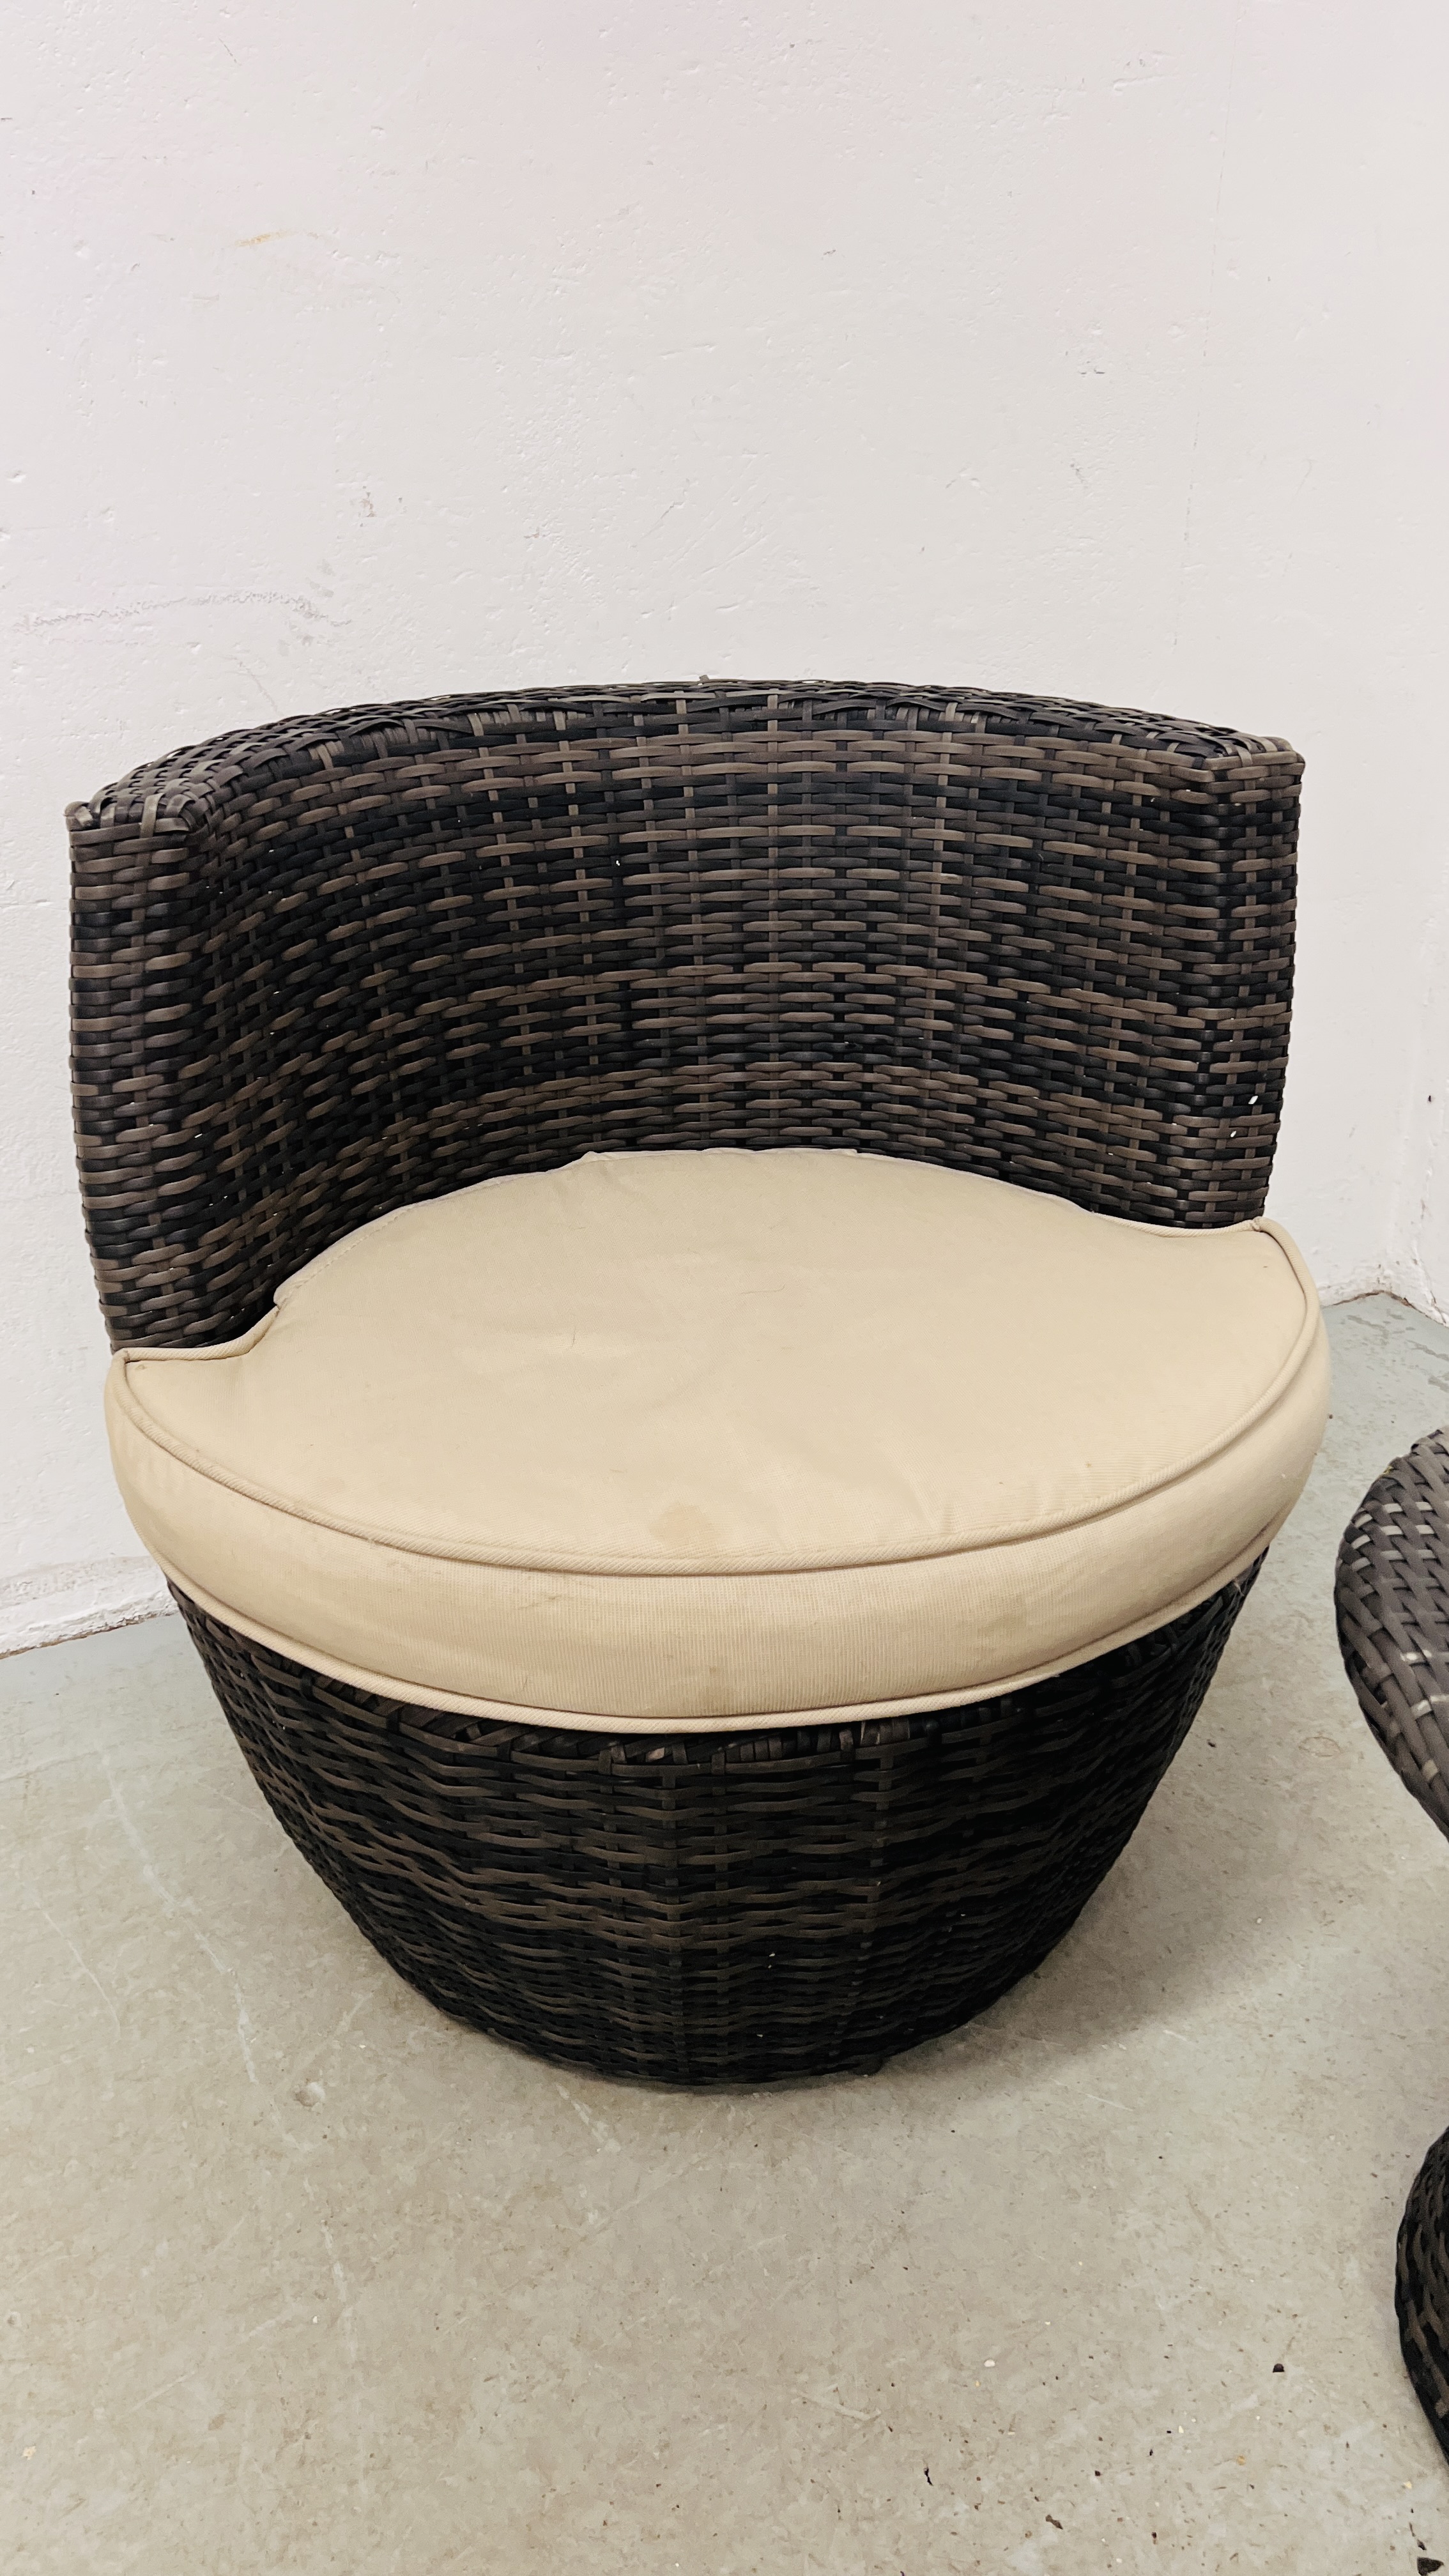 A PAIR OF MODERN GARDEN WOVEN BARREL CHAIRS ALONG WITH A MATCHING CIRCULAR TABLE. - Image 5 of 8